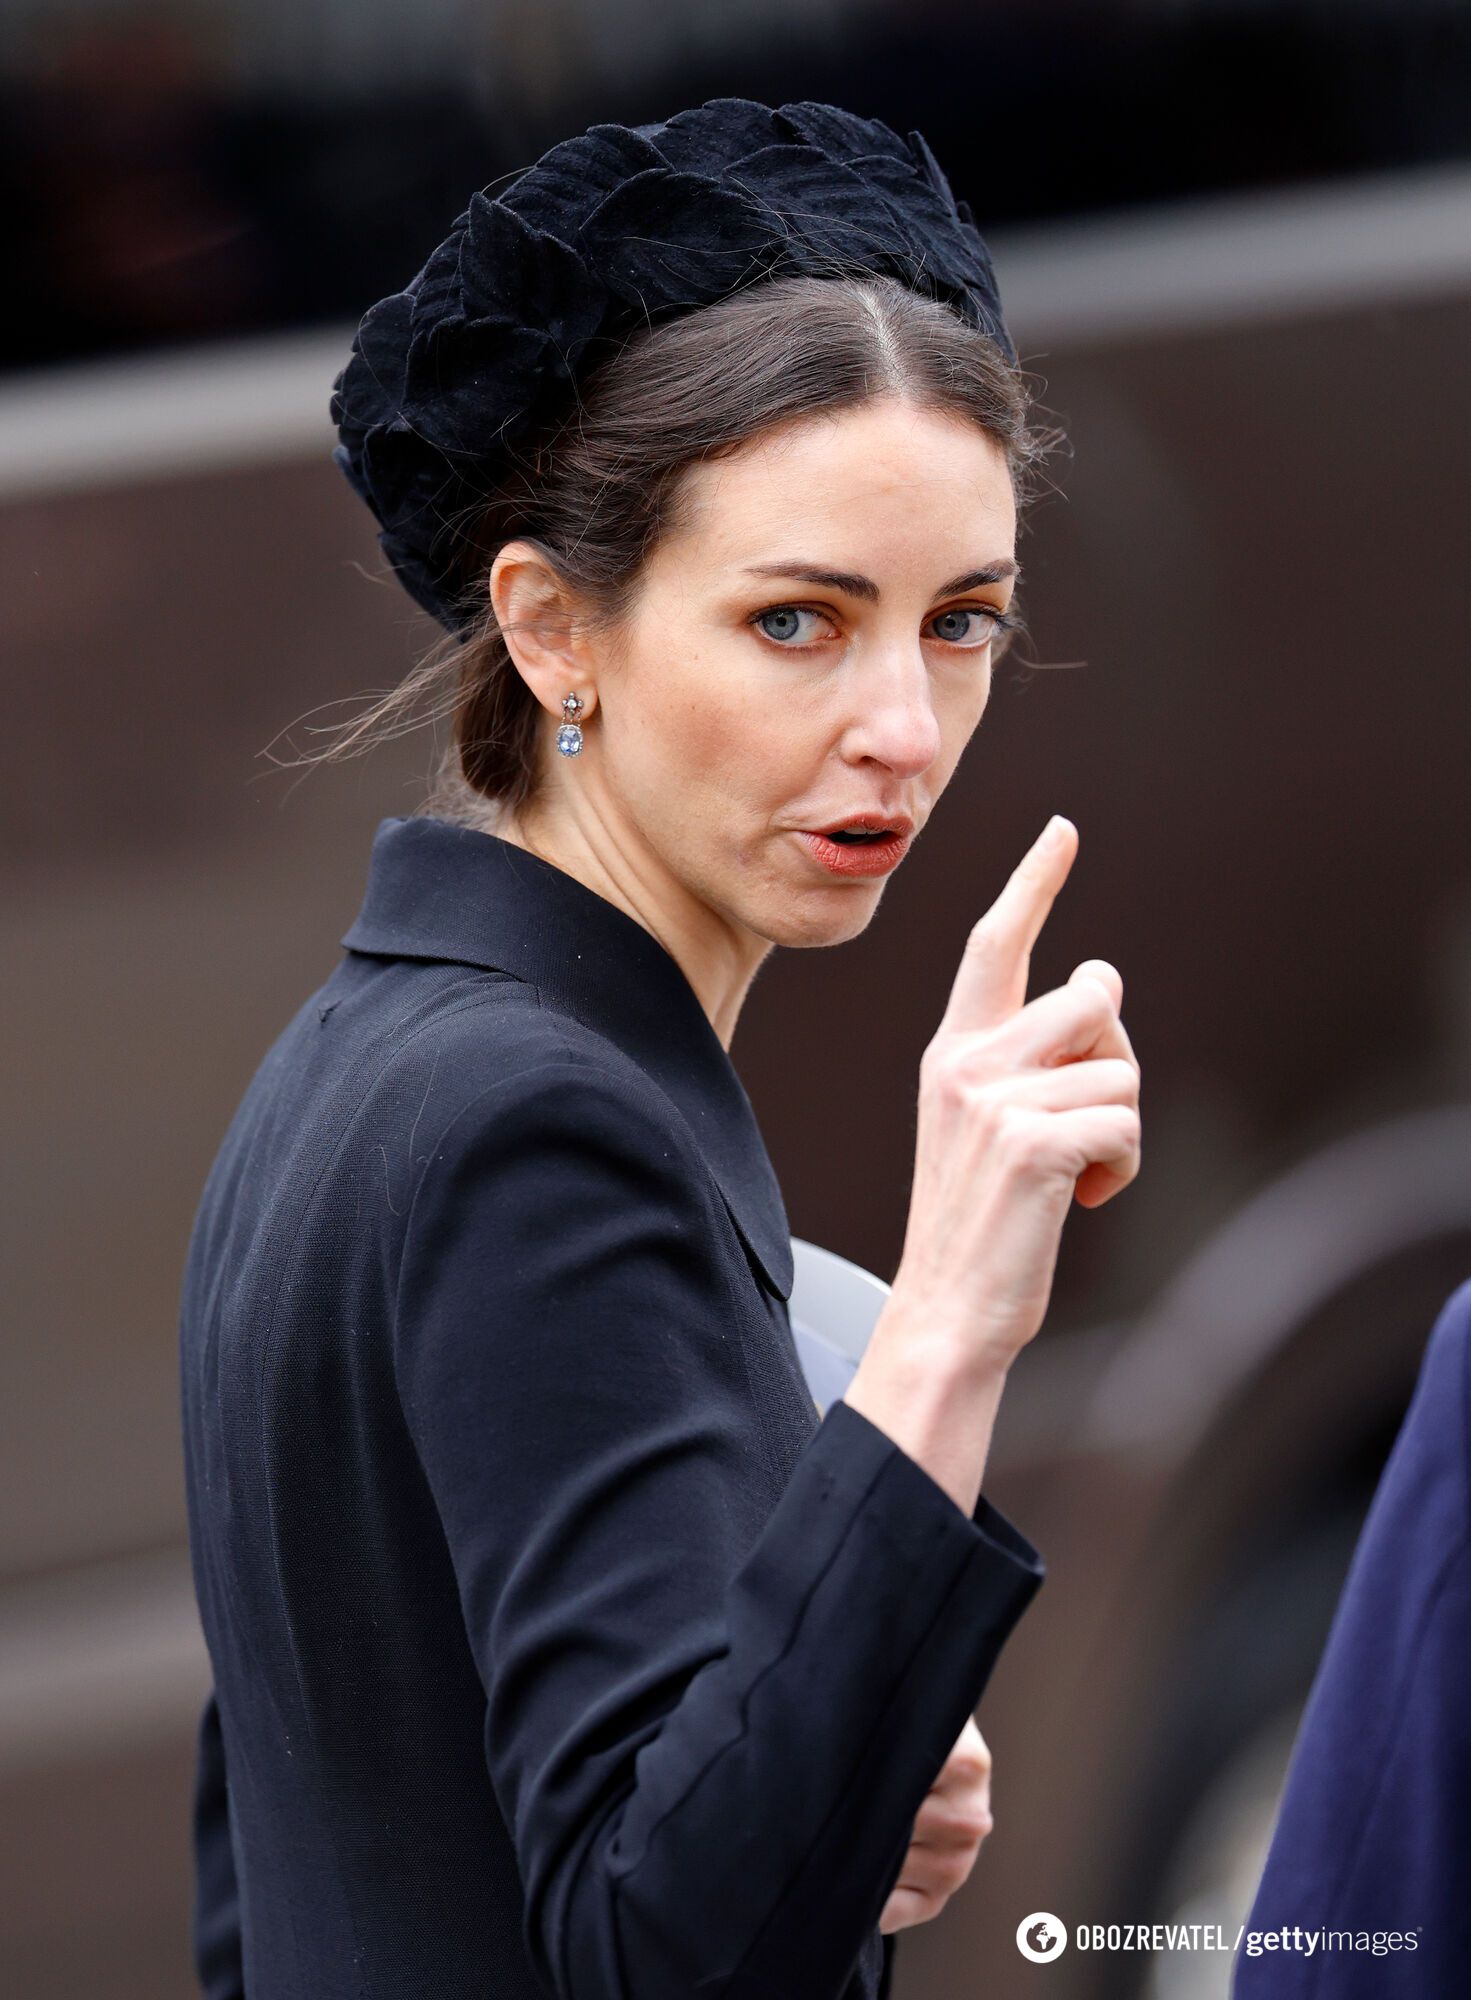 Kate Middleton was first spotted on the street after rumors of Prince William's infidelity and health problems